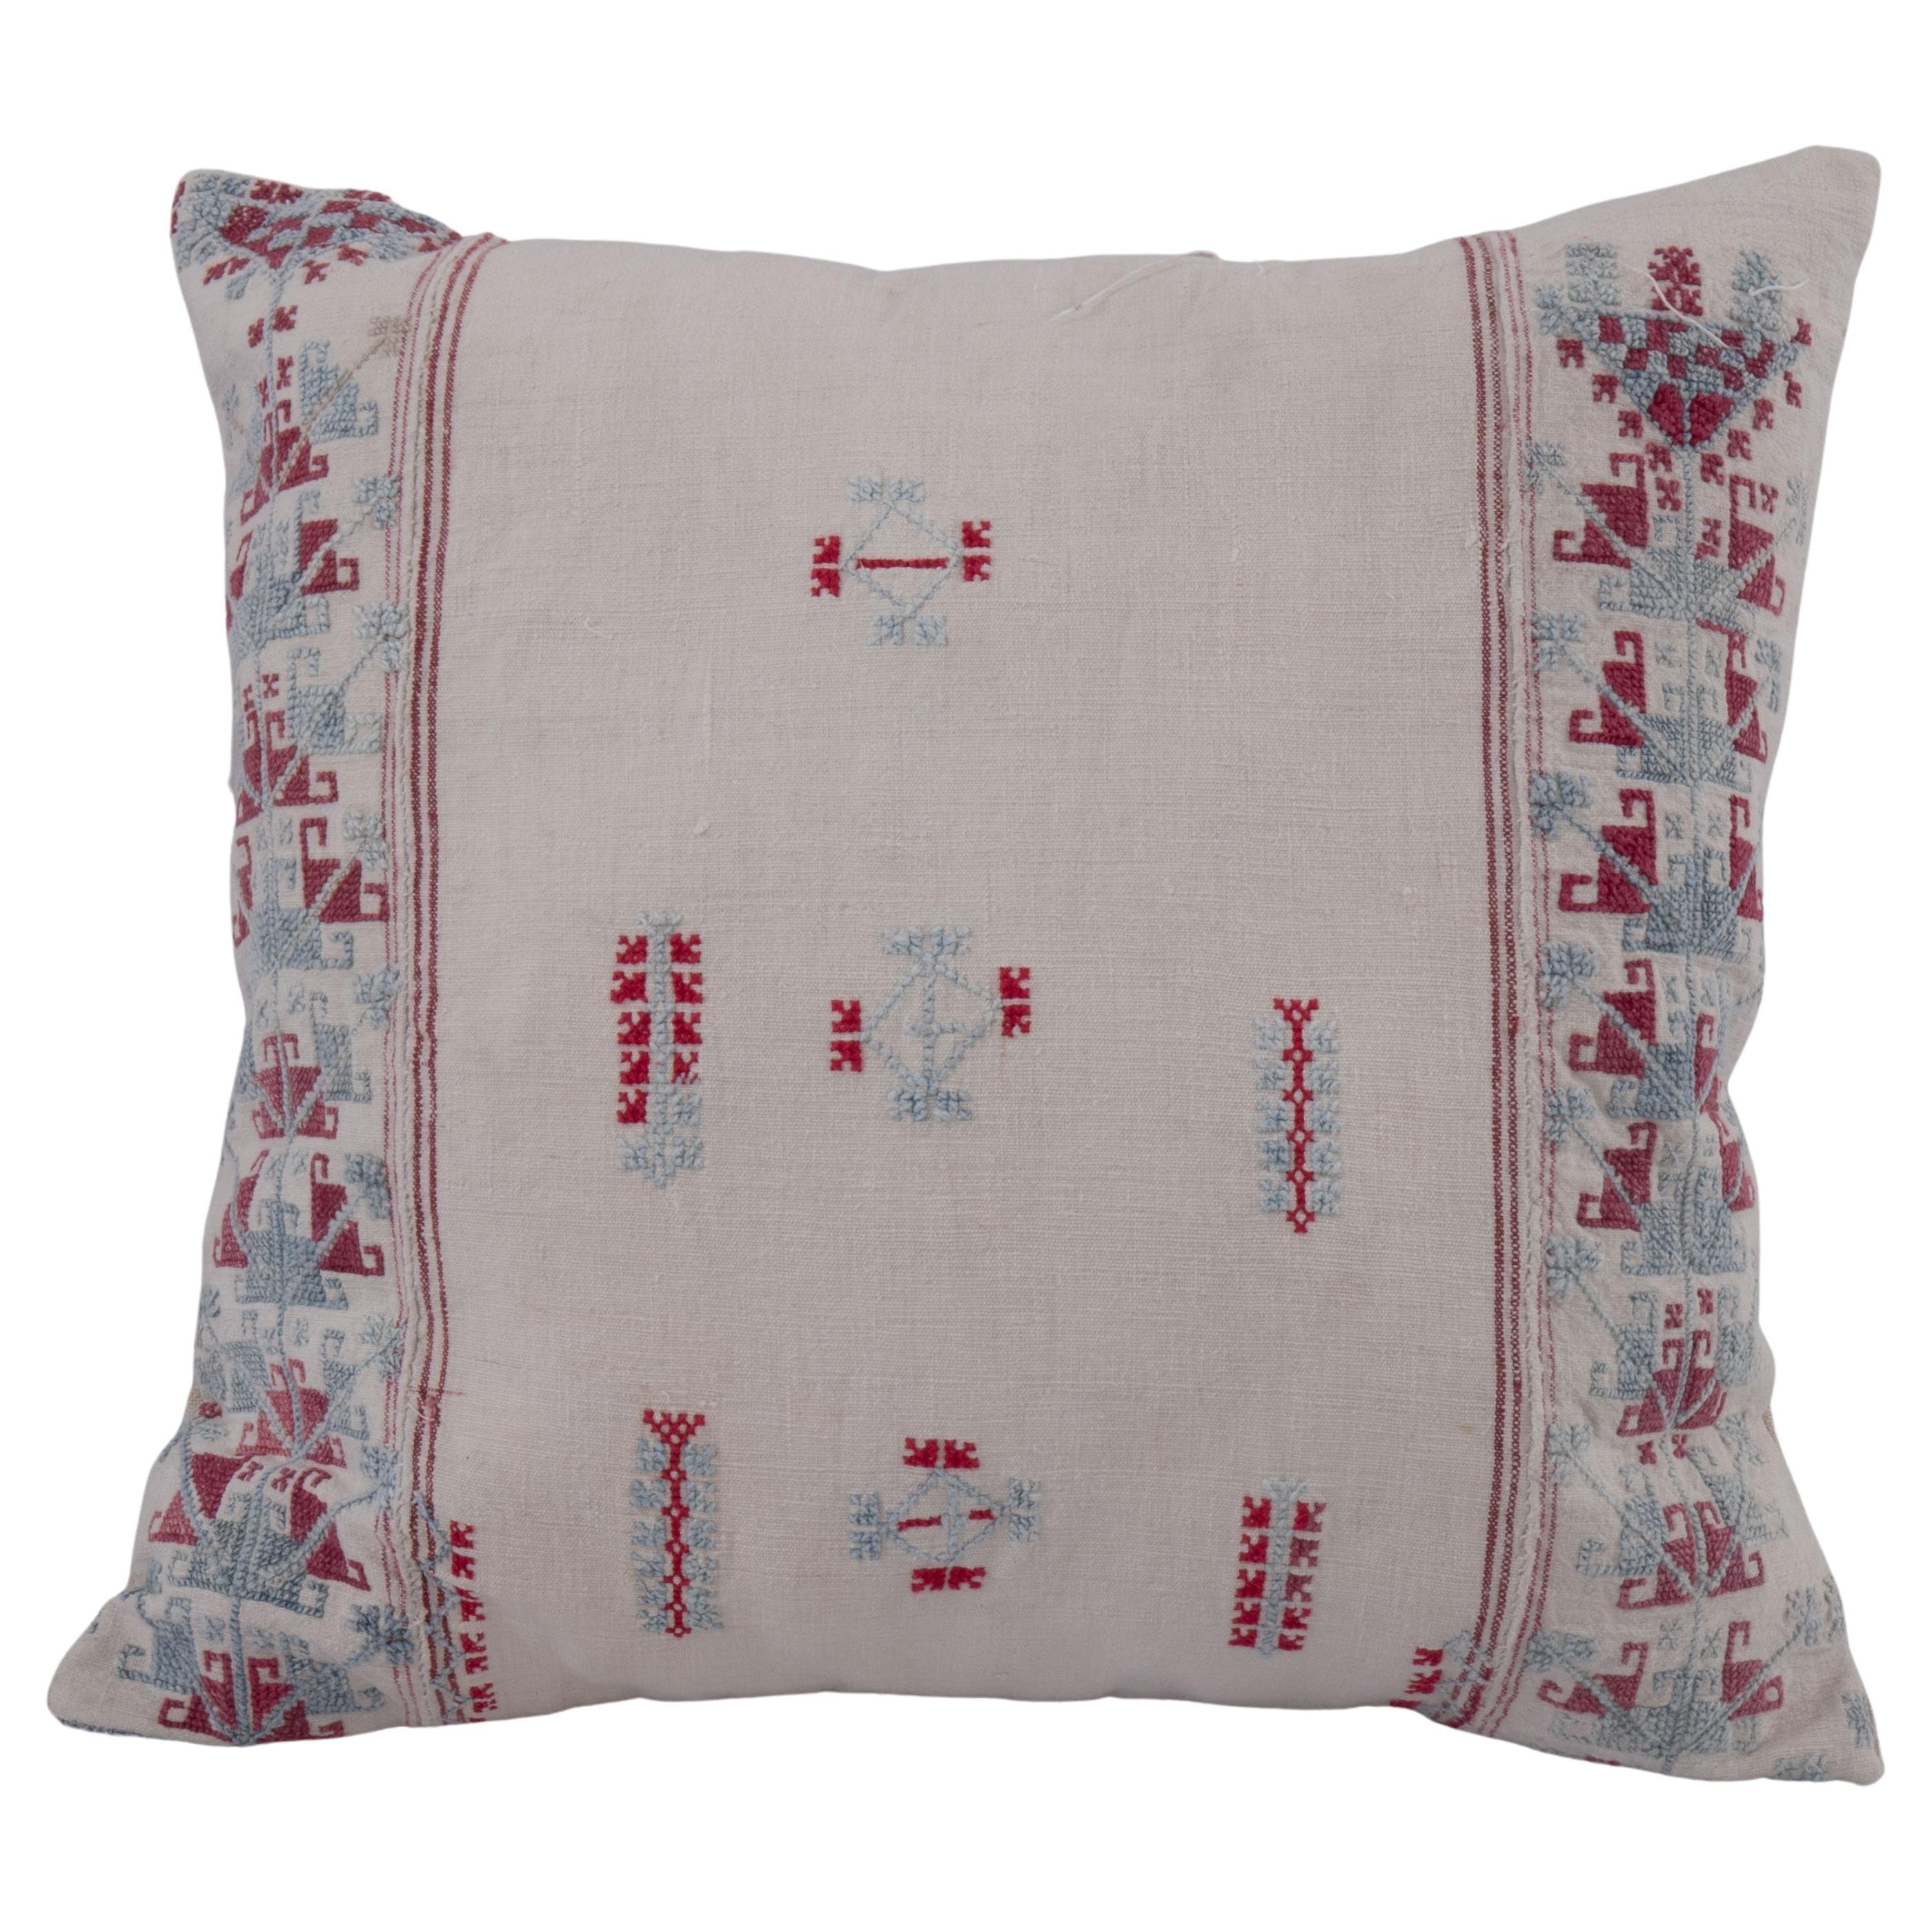 Pillow Cover Made from an Anatolian Embroidered Skirt, 2nd Quarter 20th C. For Sale